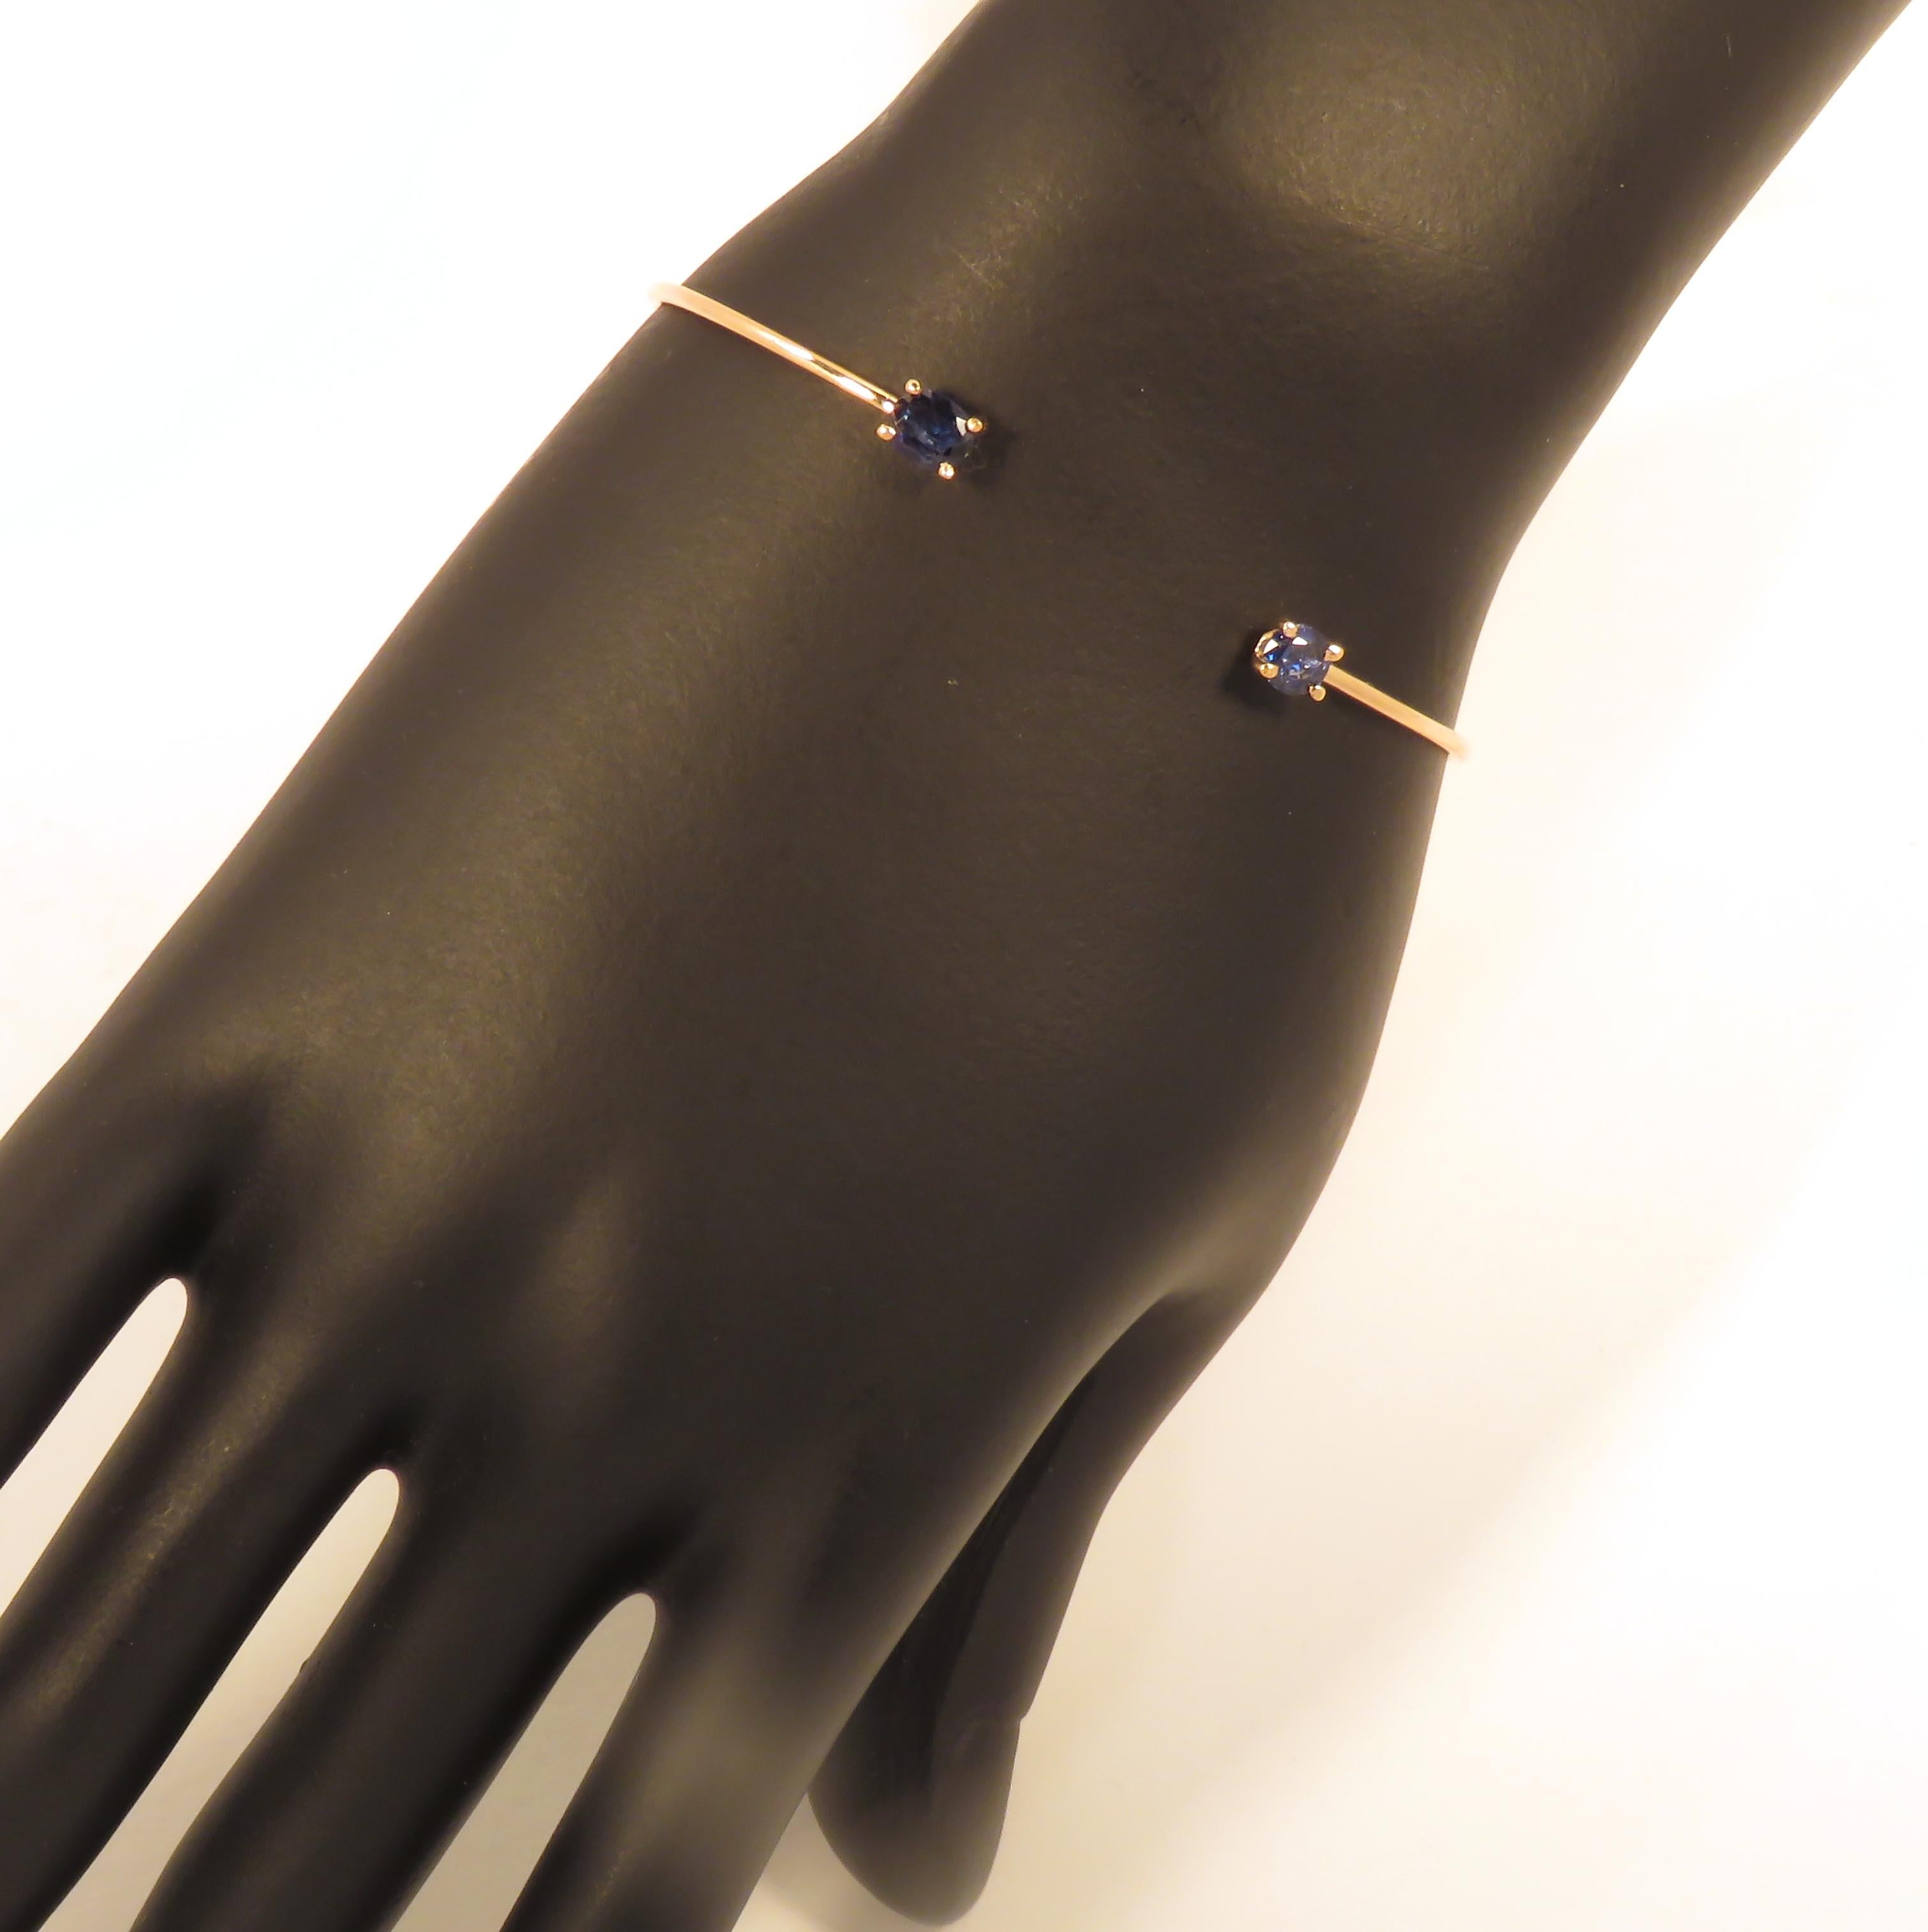 Beautiful cuff bracelet crafted in 9 karat rose gold featuring 2 oval cut sapphires. The inner size is 58x45 mm /  2.283x1.771 inches. Marked with the Italian gold mark 375 and Botta Gioielli brand mark 716MI.
Search Ref:  LU126214022182 in my